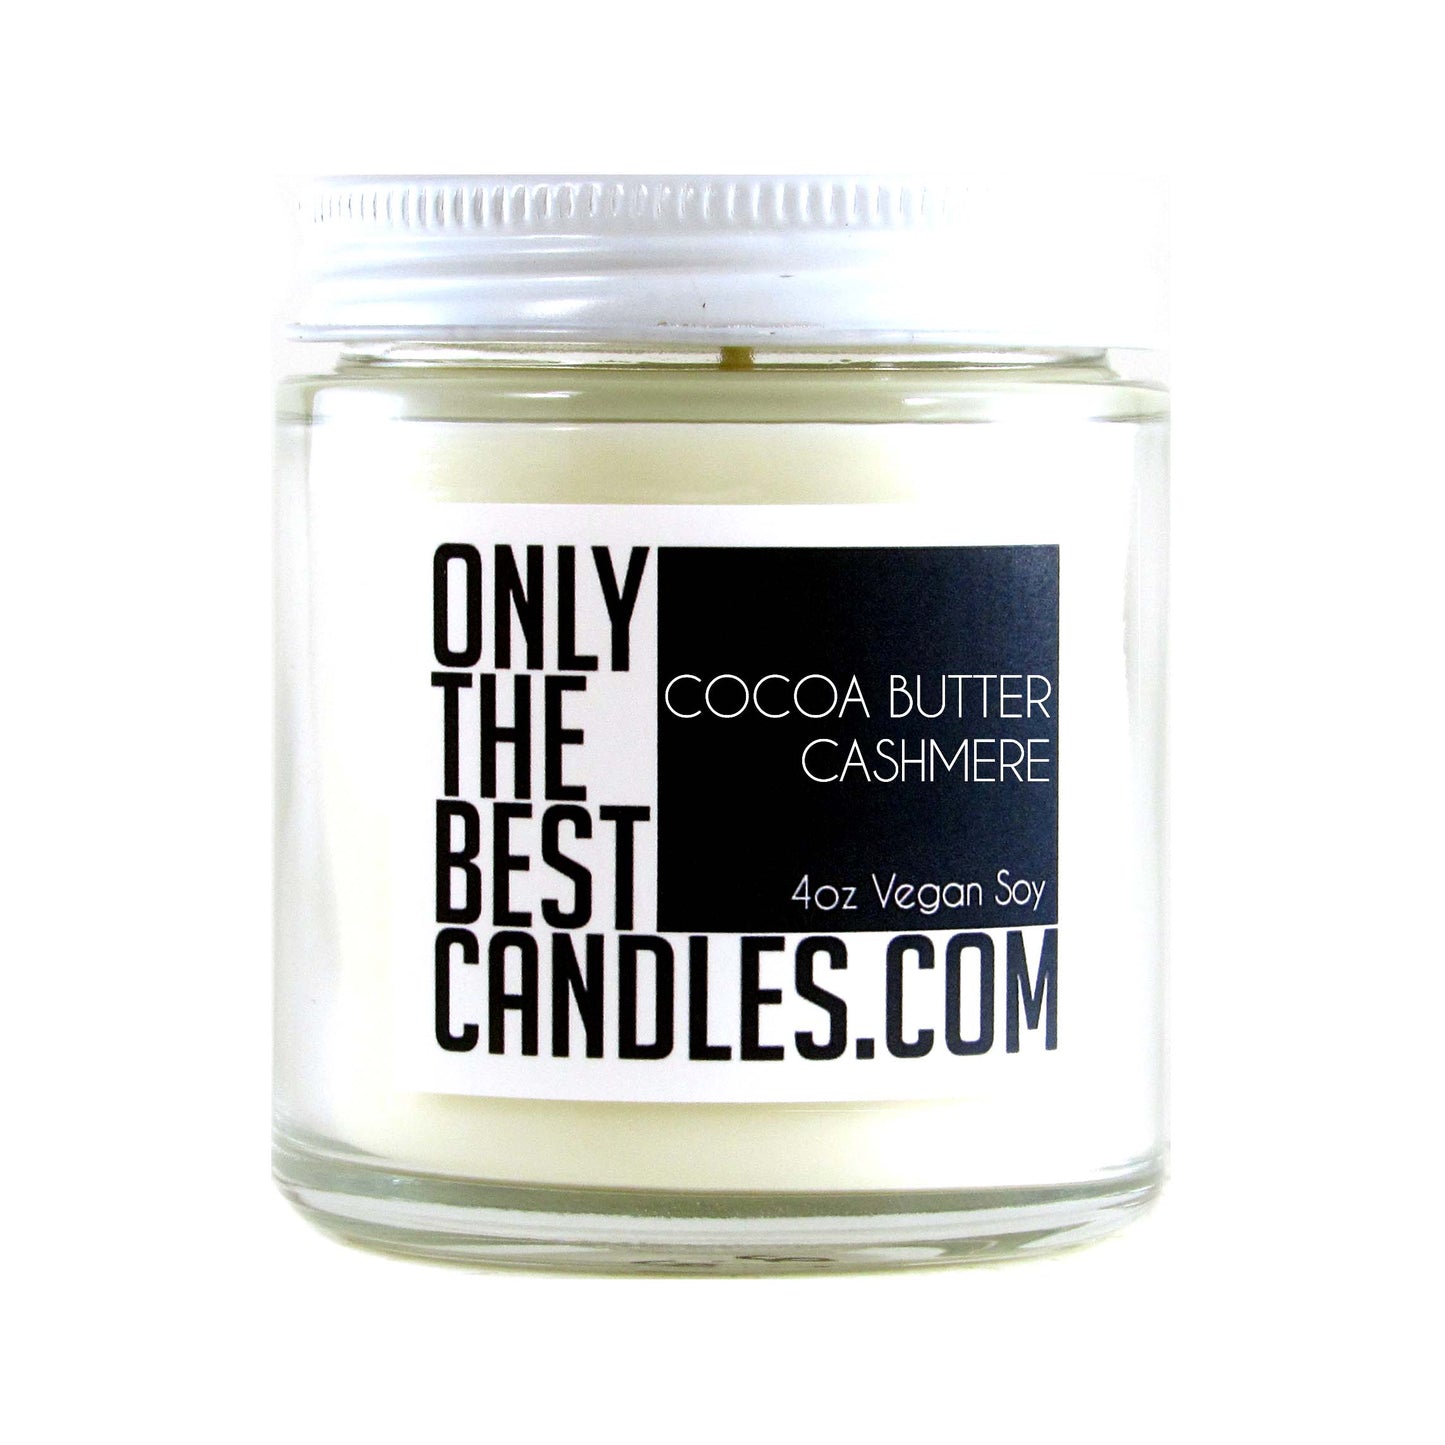 Cocoa Butter Cashmere 4oz Candle